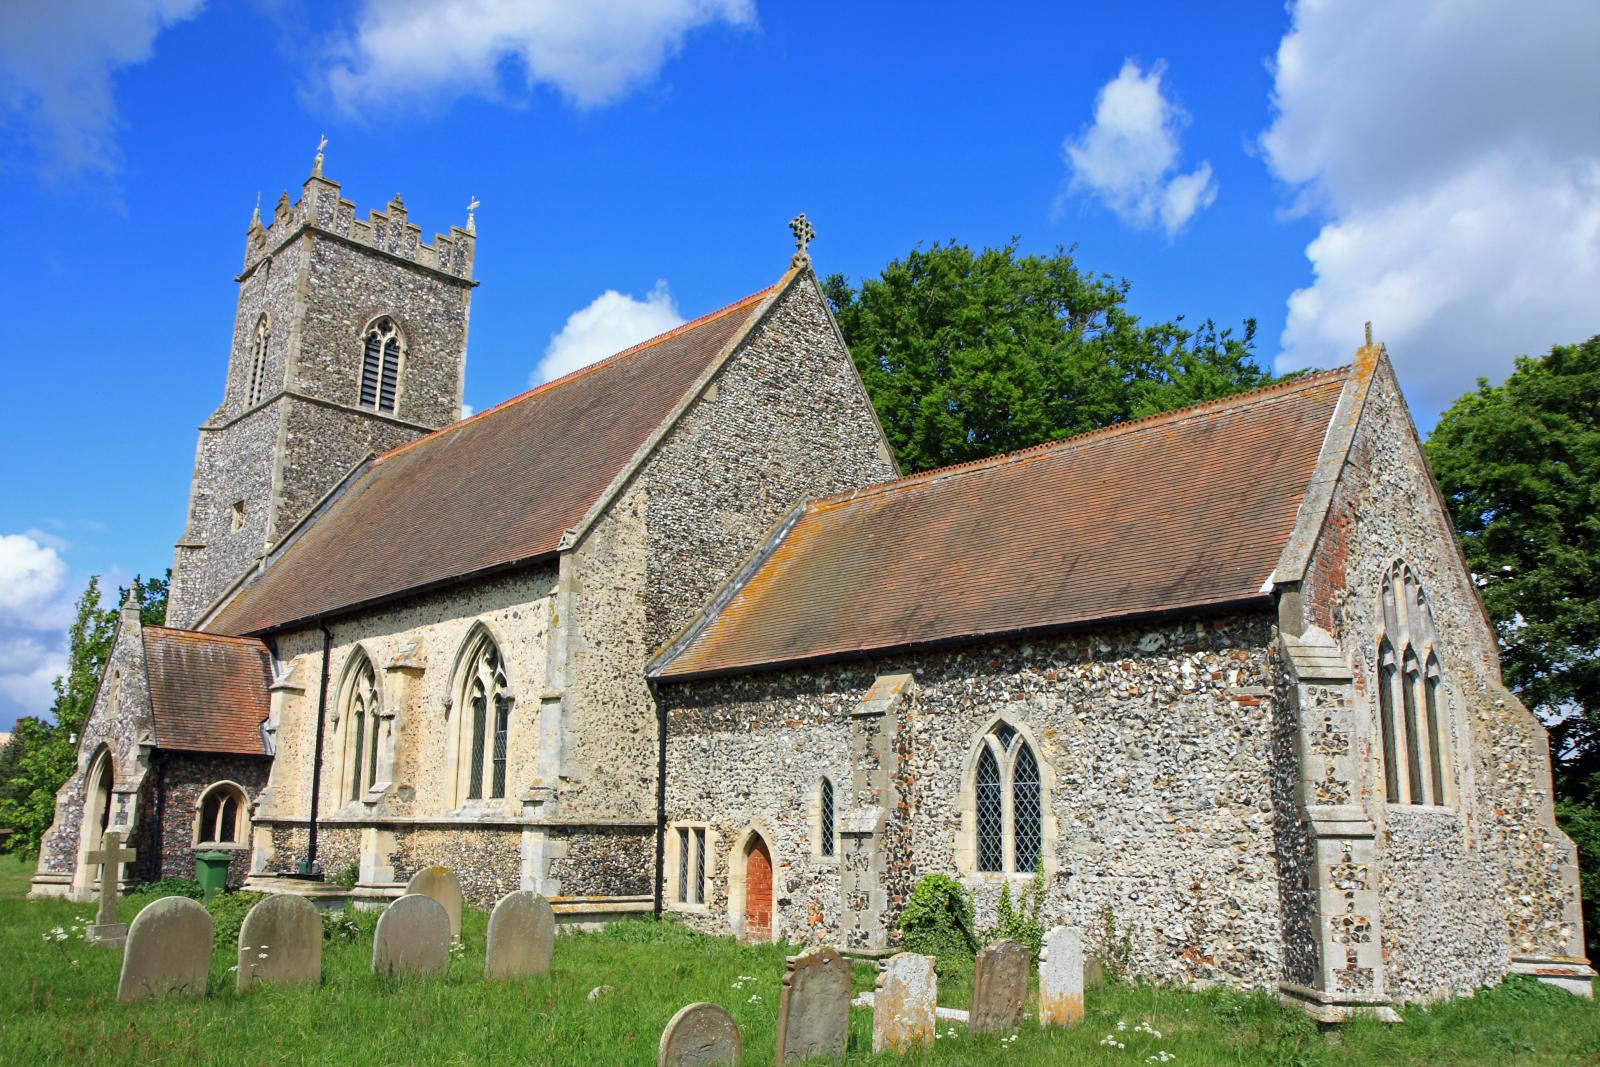 a stone church with a steeple, graves and trees